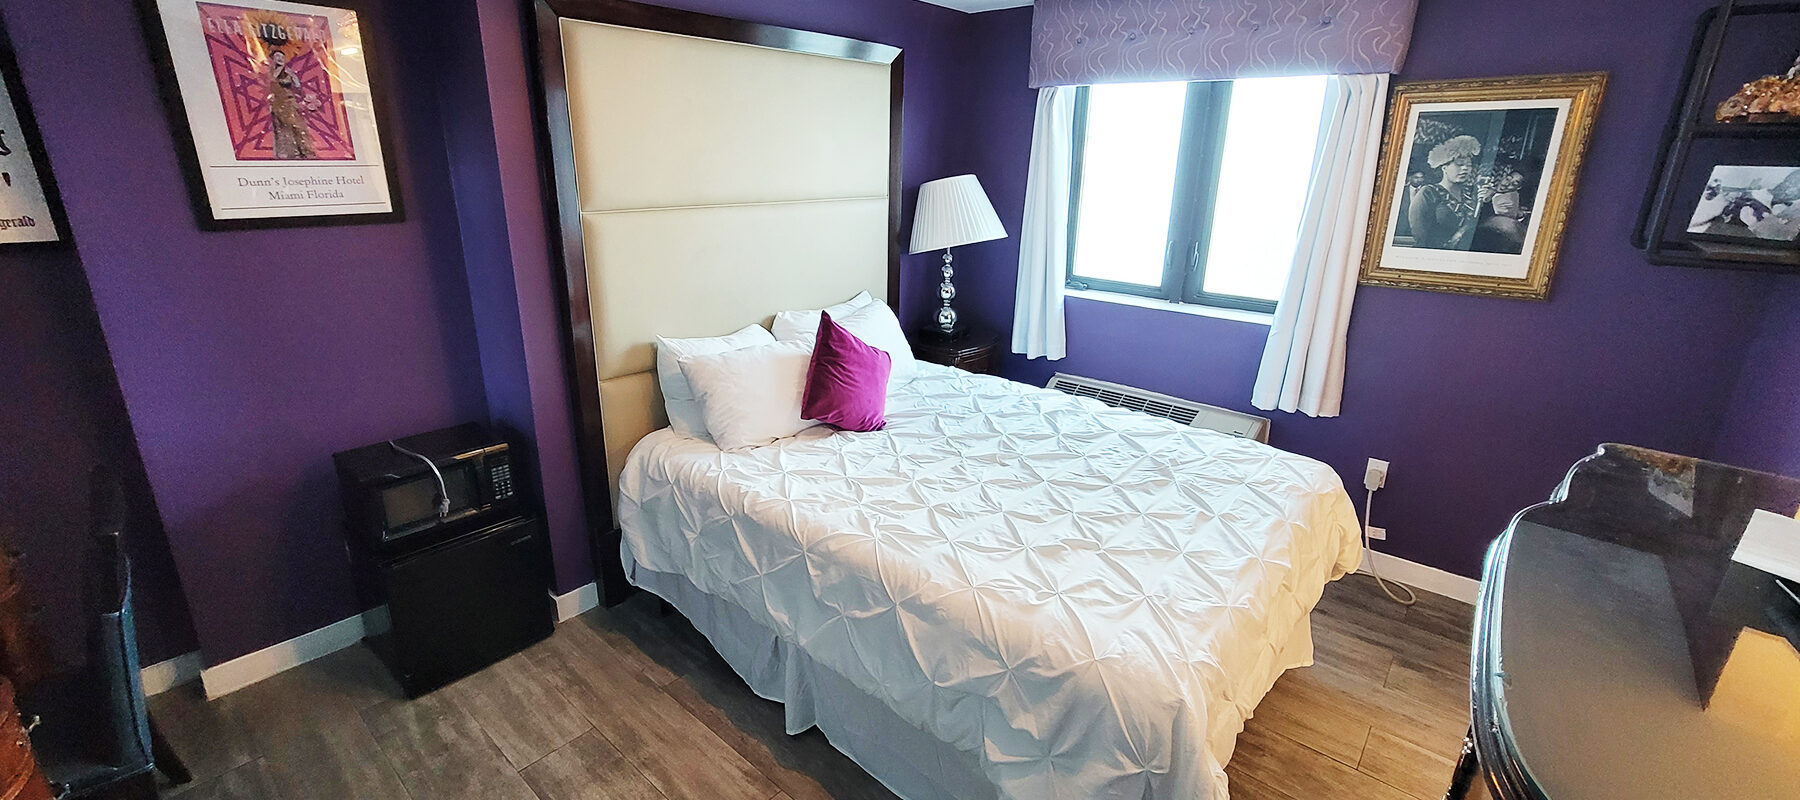 Ela Fitzgerald room. Kings size bed with leather head board in a room with purple walls